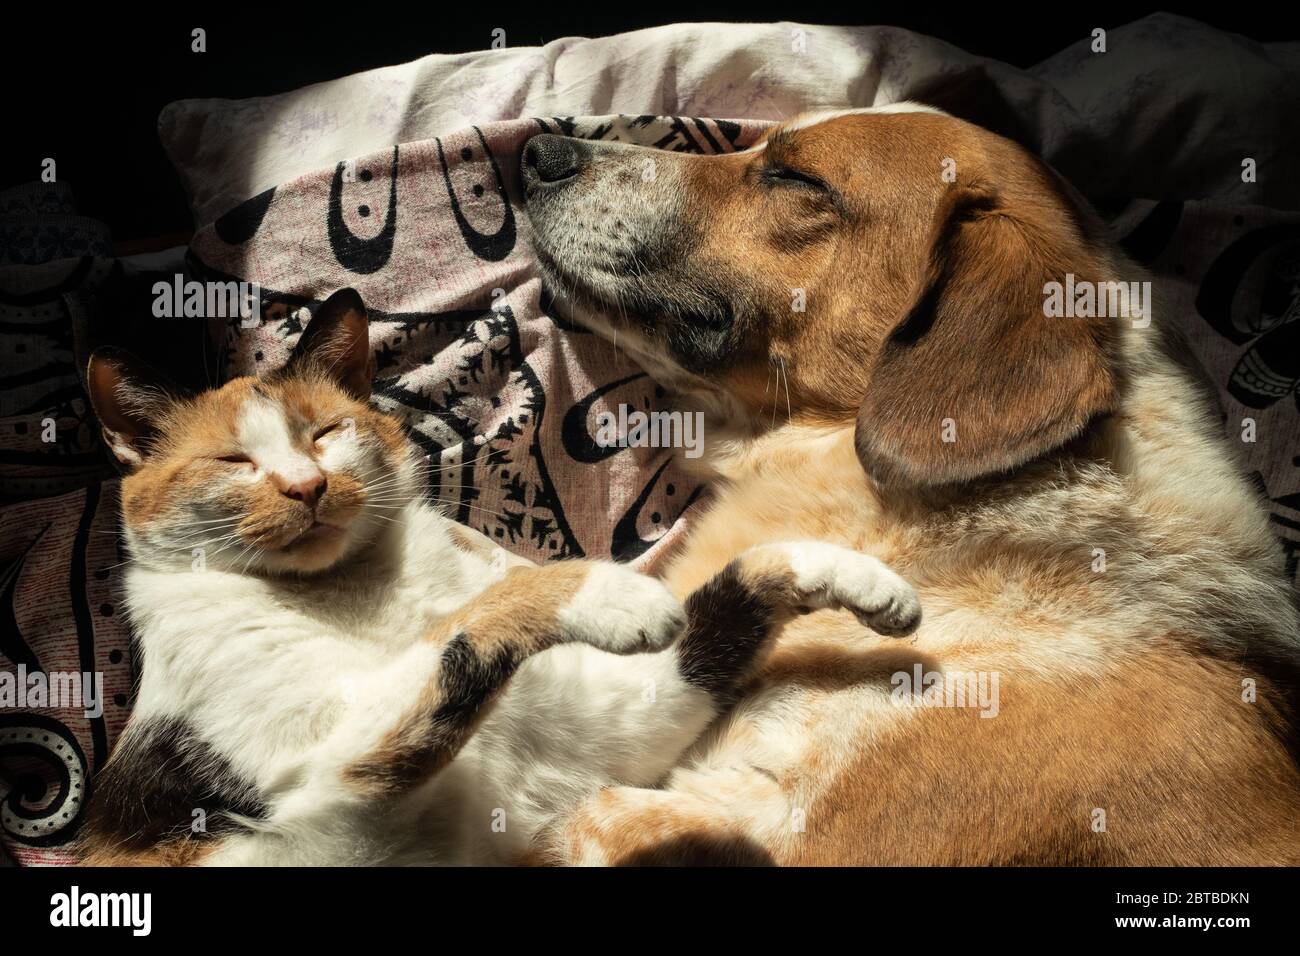 Cute dog and cat are napping together in bed Stock Photo